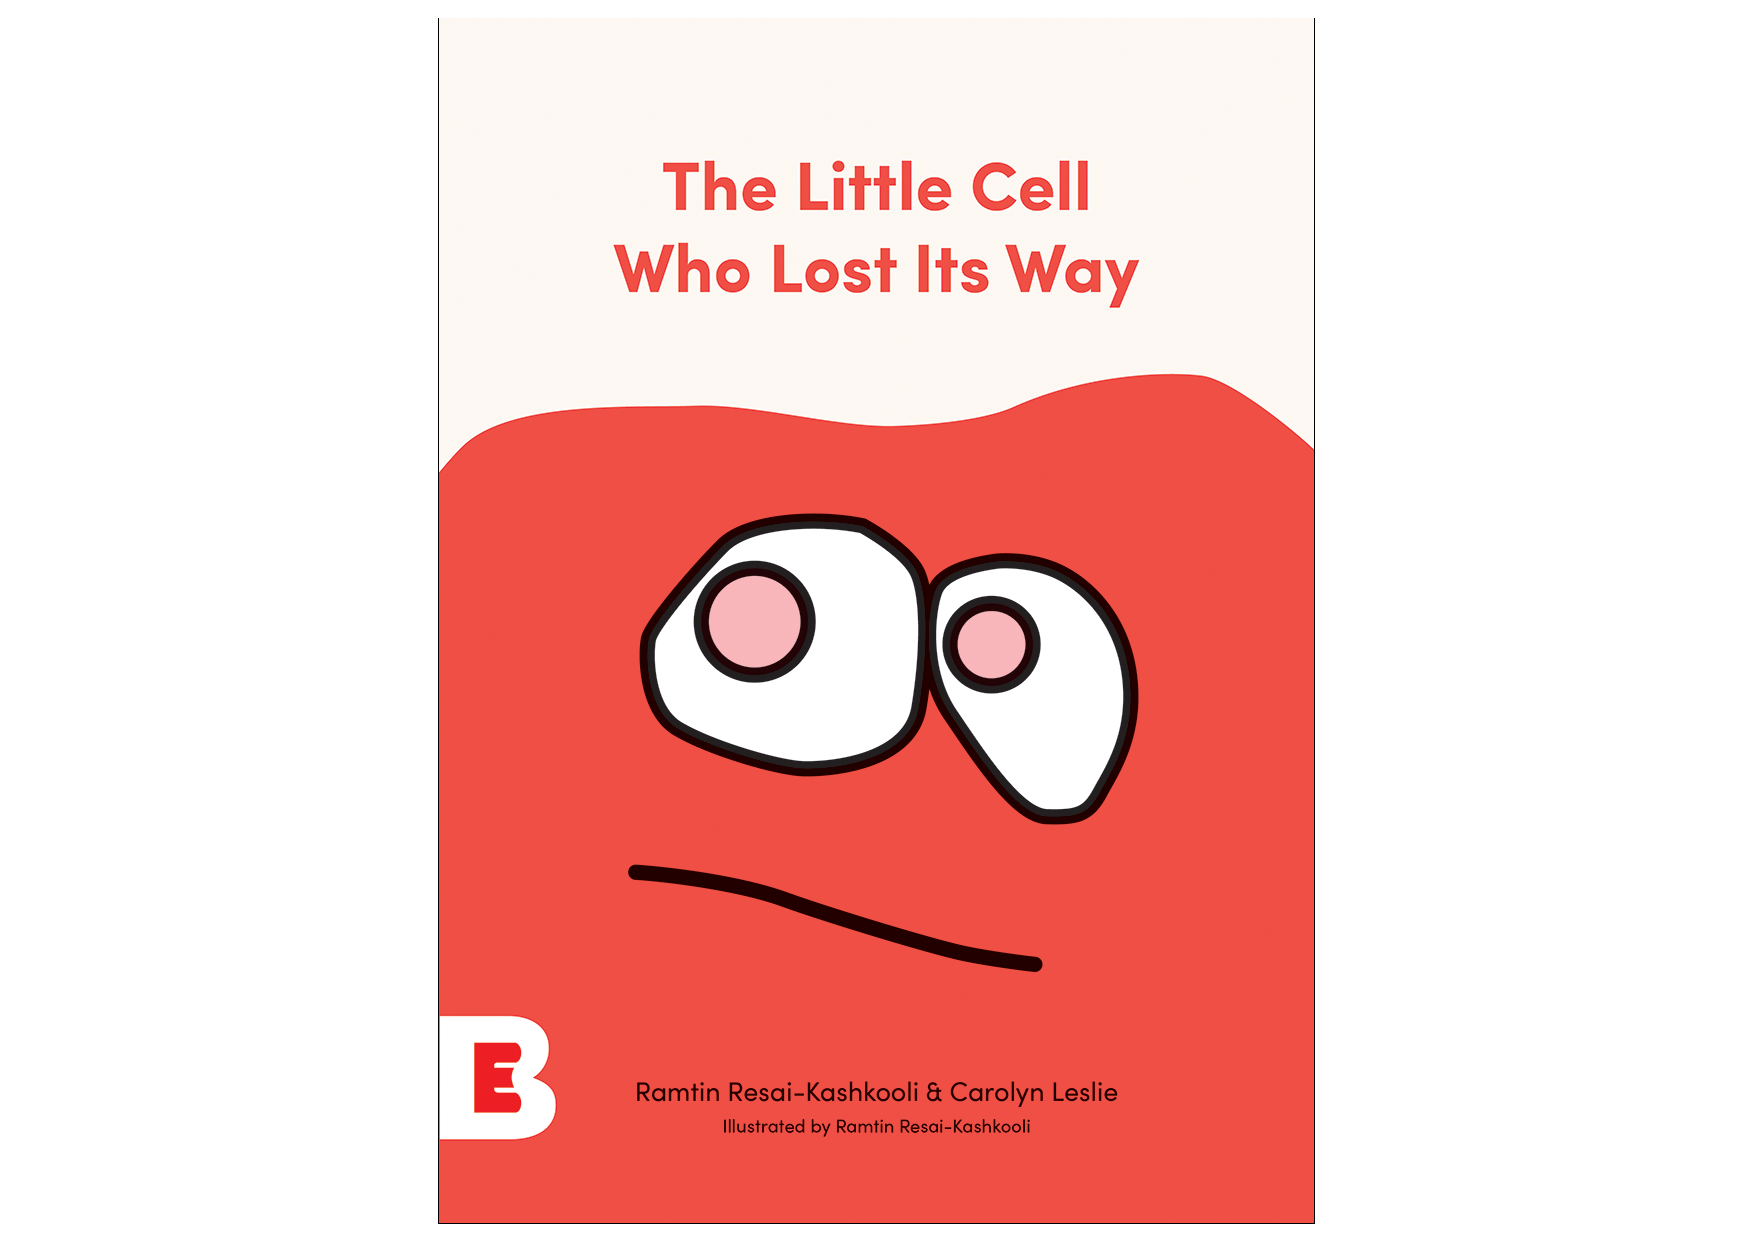 The Little Cell Who Lost Its Way